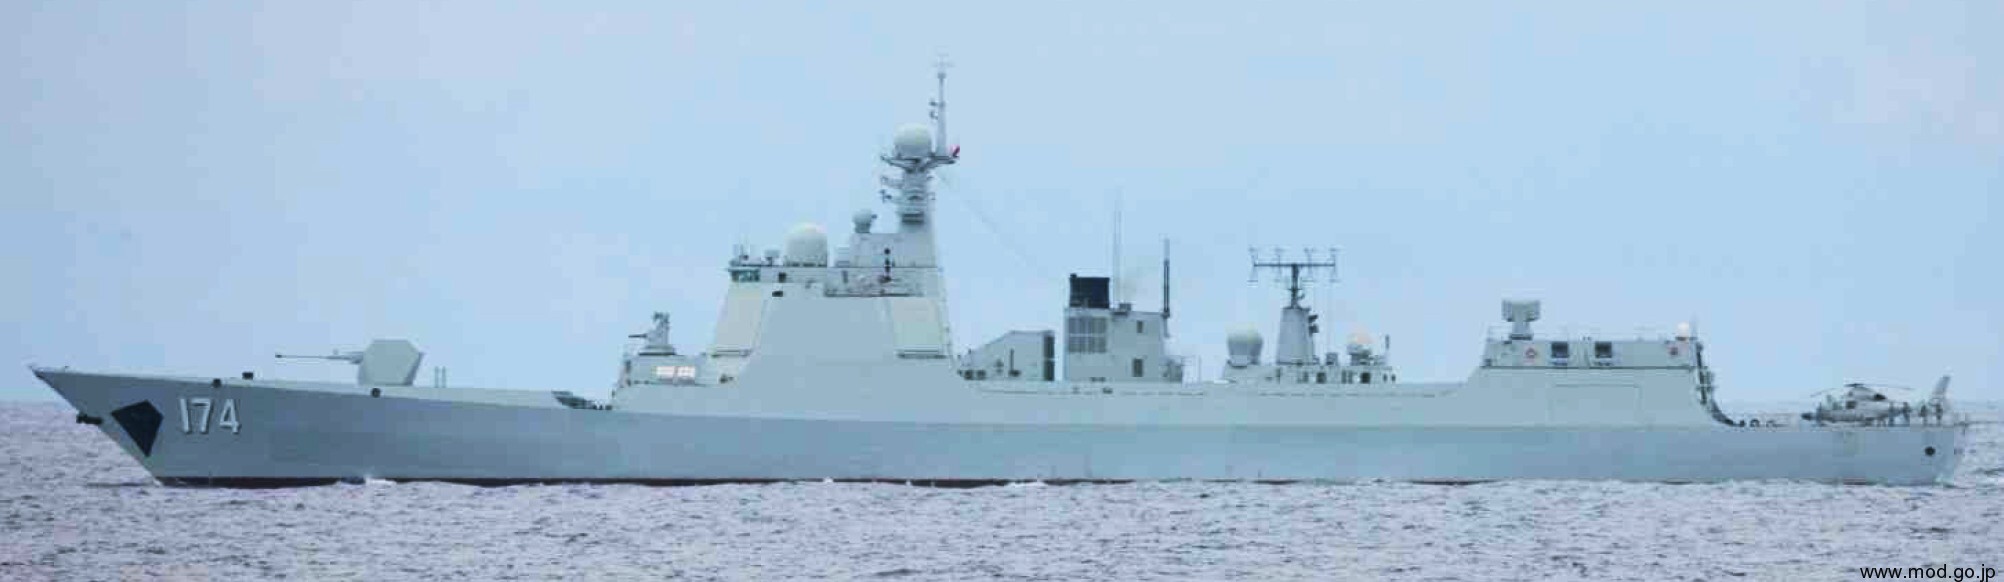 ddg-174 plans hefei type 052d luyang class guided missile destroyer ddg china people's liberation army navy 02